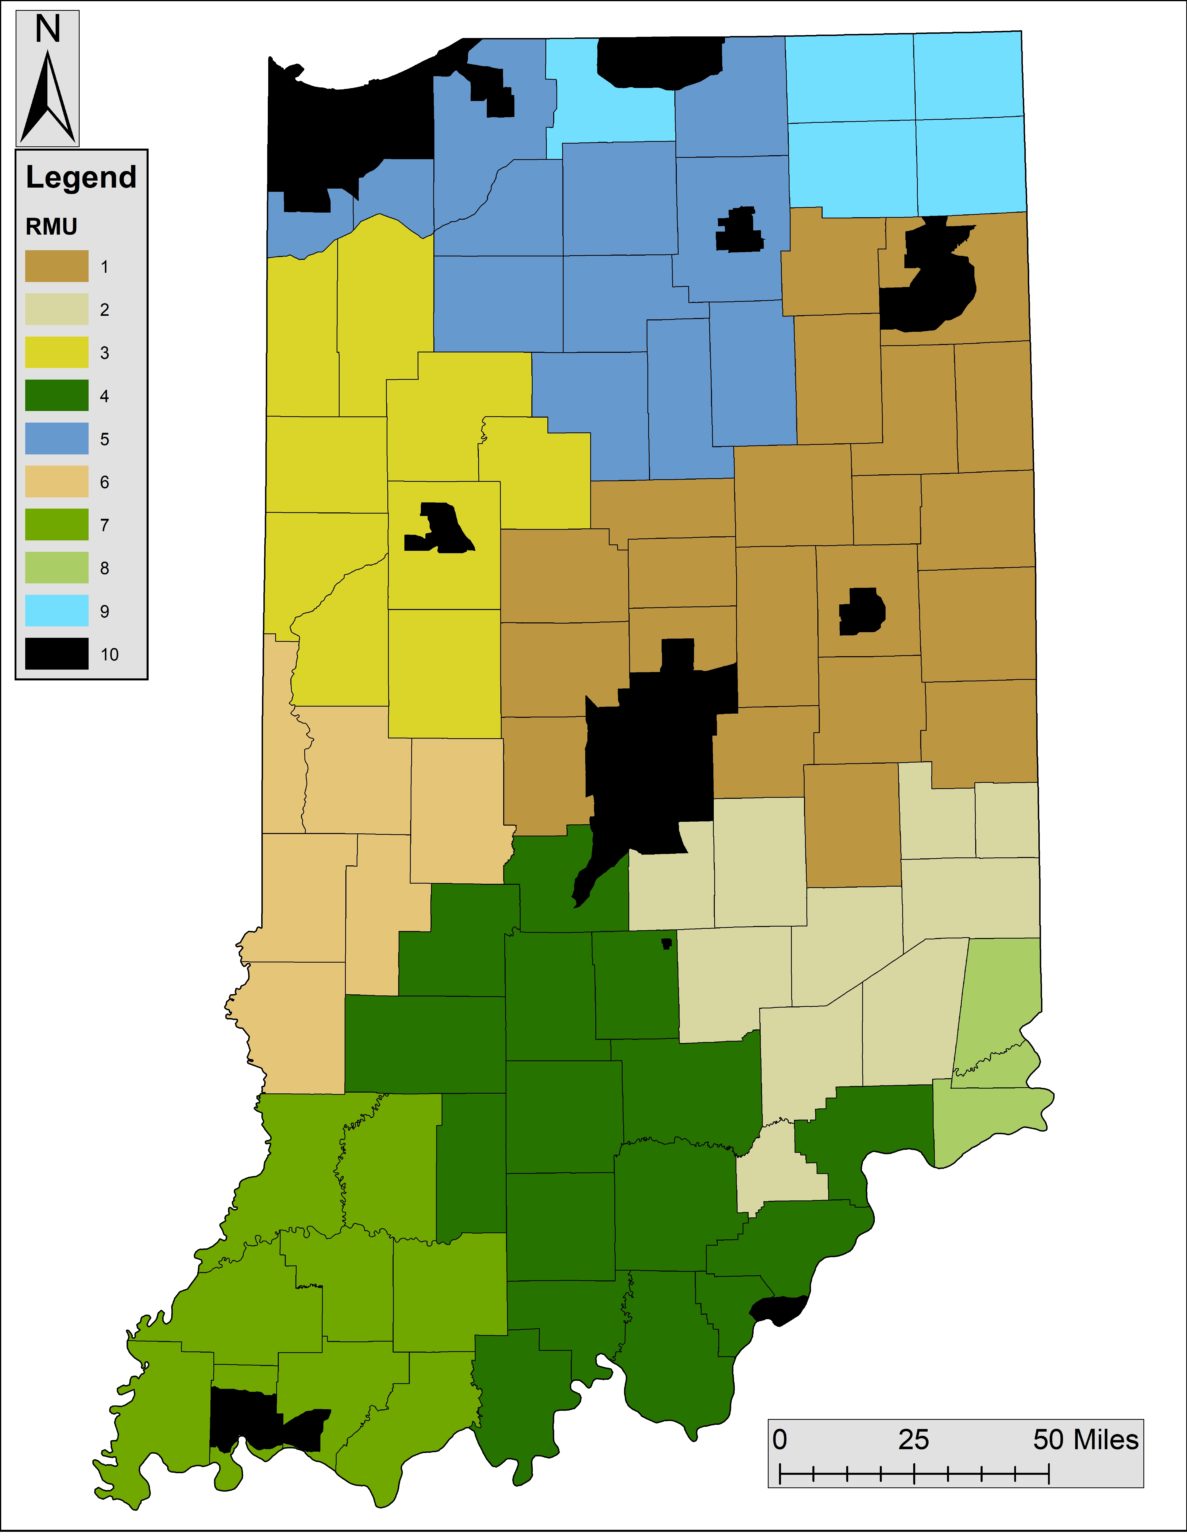 Indiana state map showing all counties and ten colored coded Research Management Units